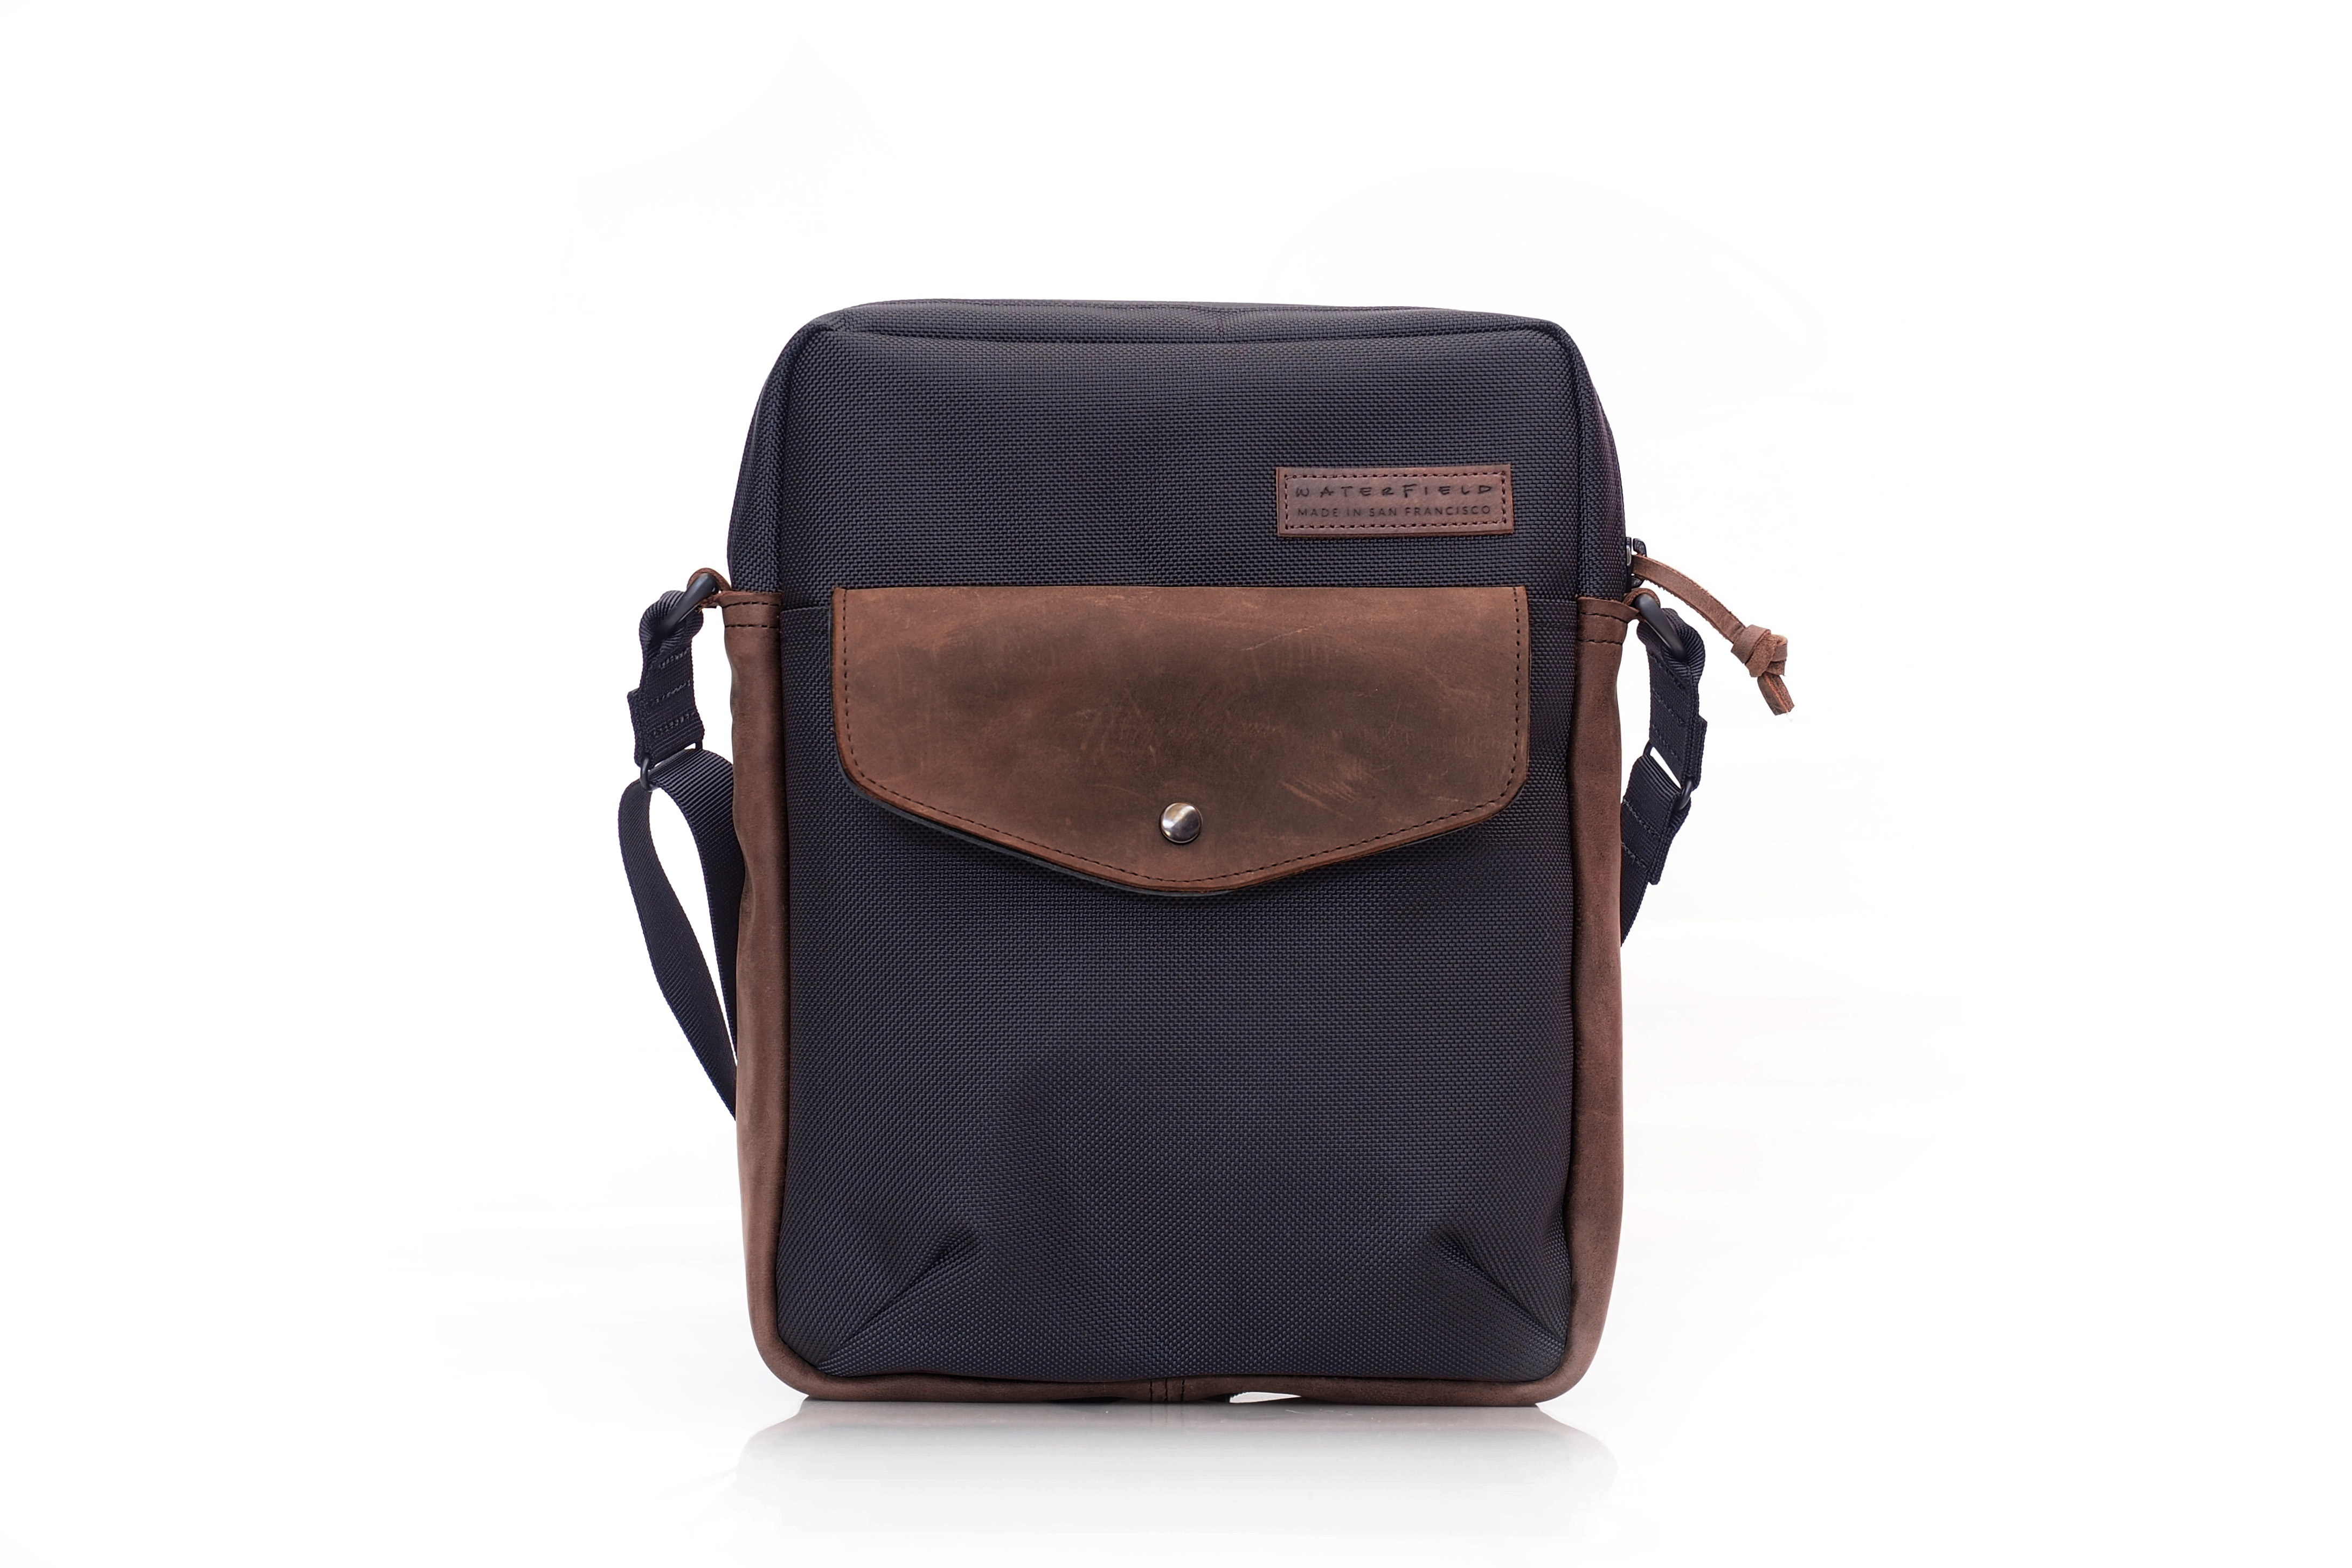 WaterField Debuts Travel-ready Bolt Crossbody Bag for Microsoft’s New Surface Laptop